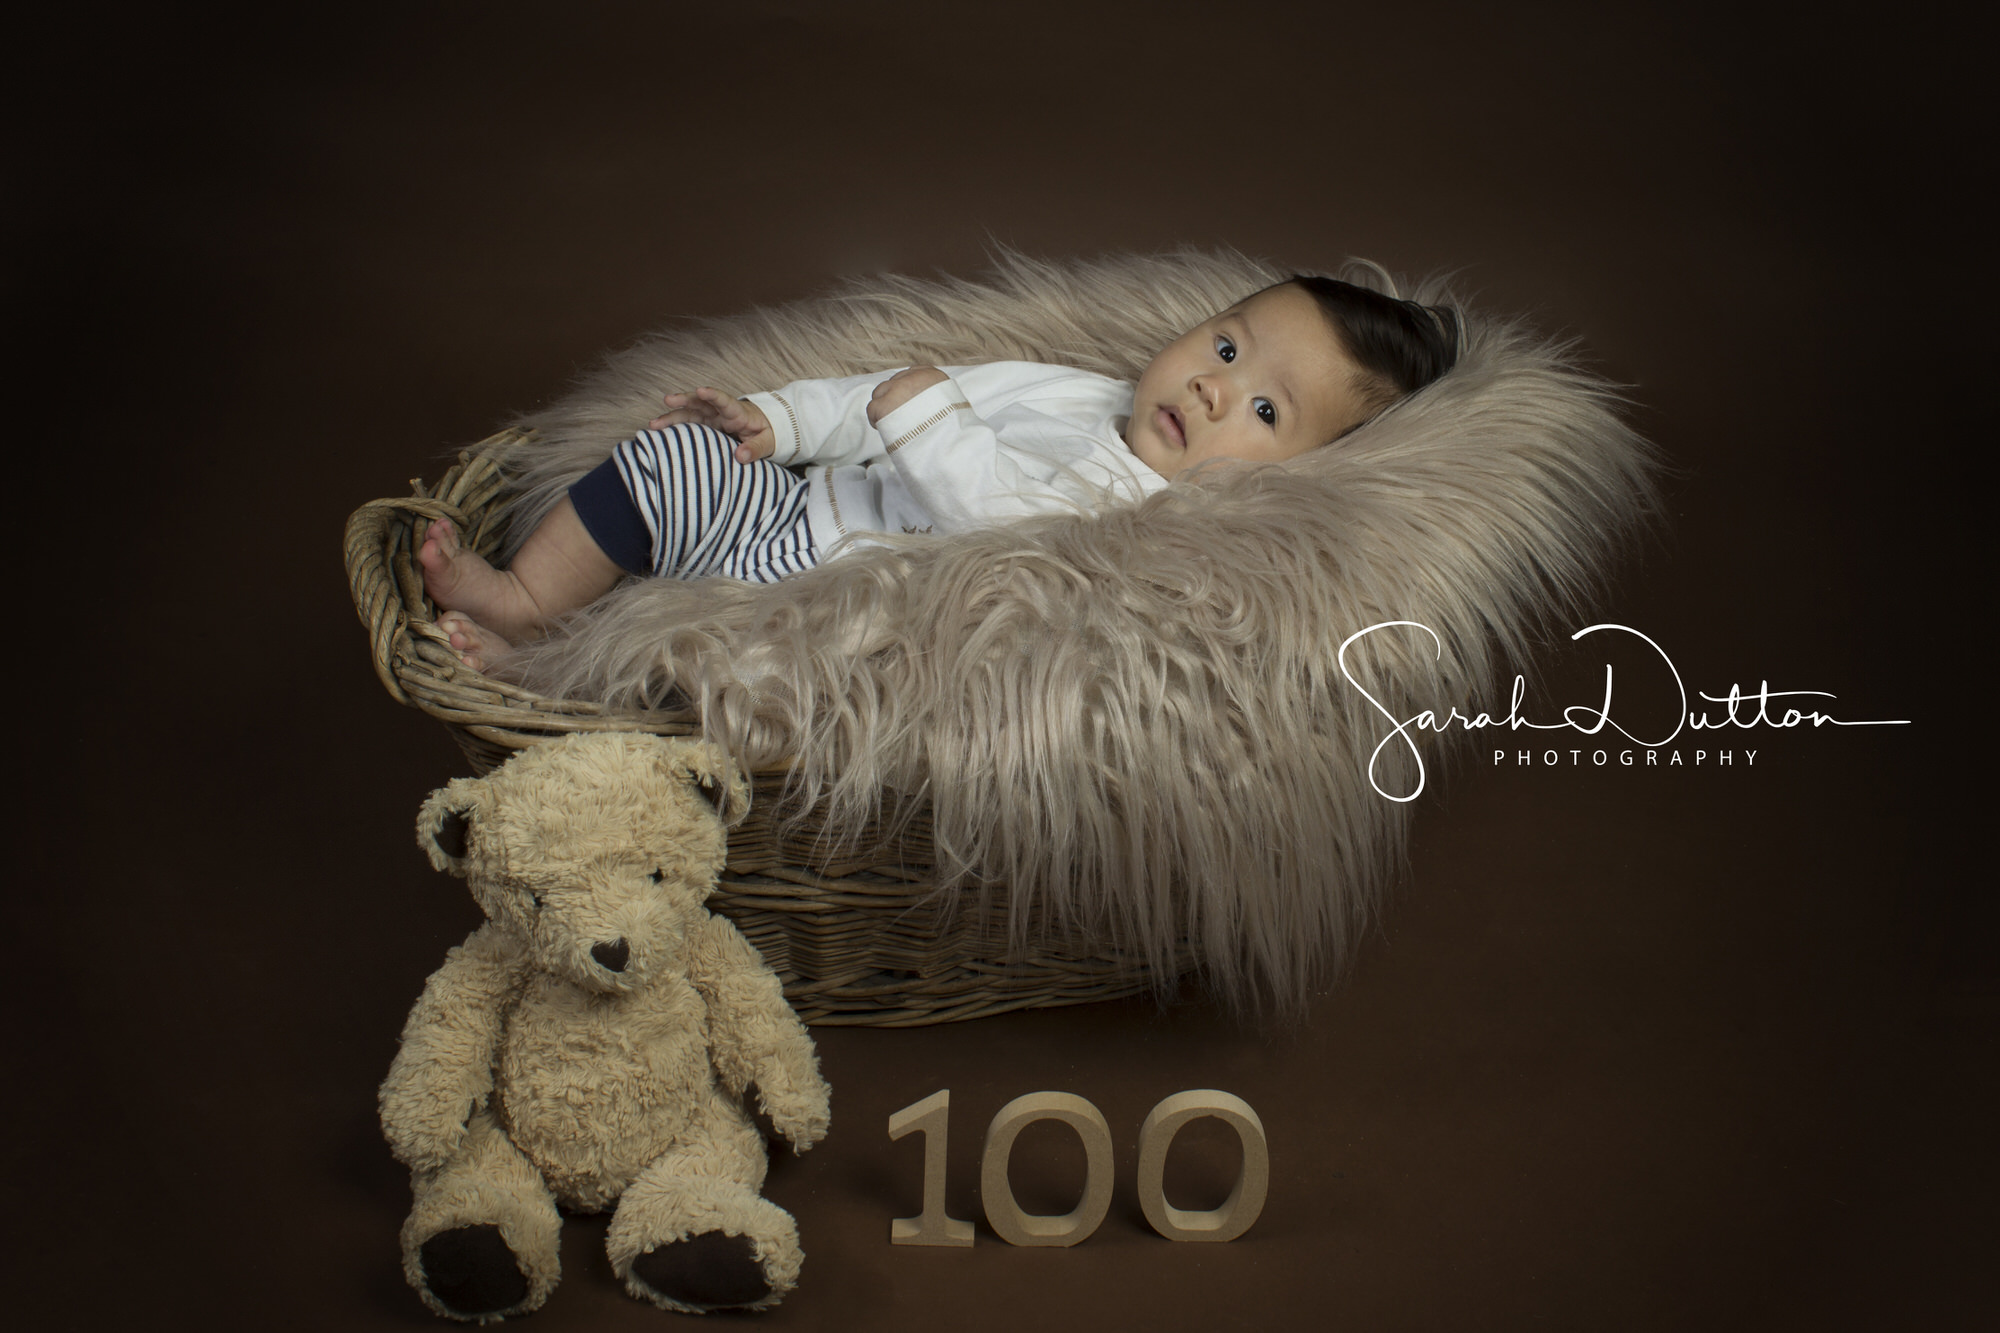 Family and Baby Photography taken in the Photography studio in Whitchurch Hampshire